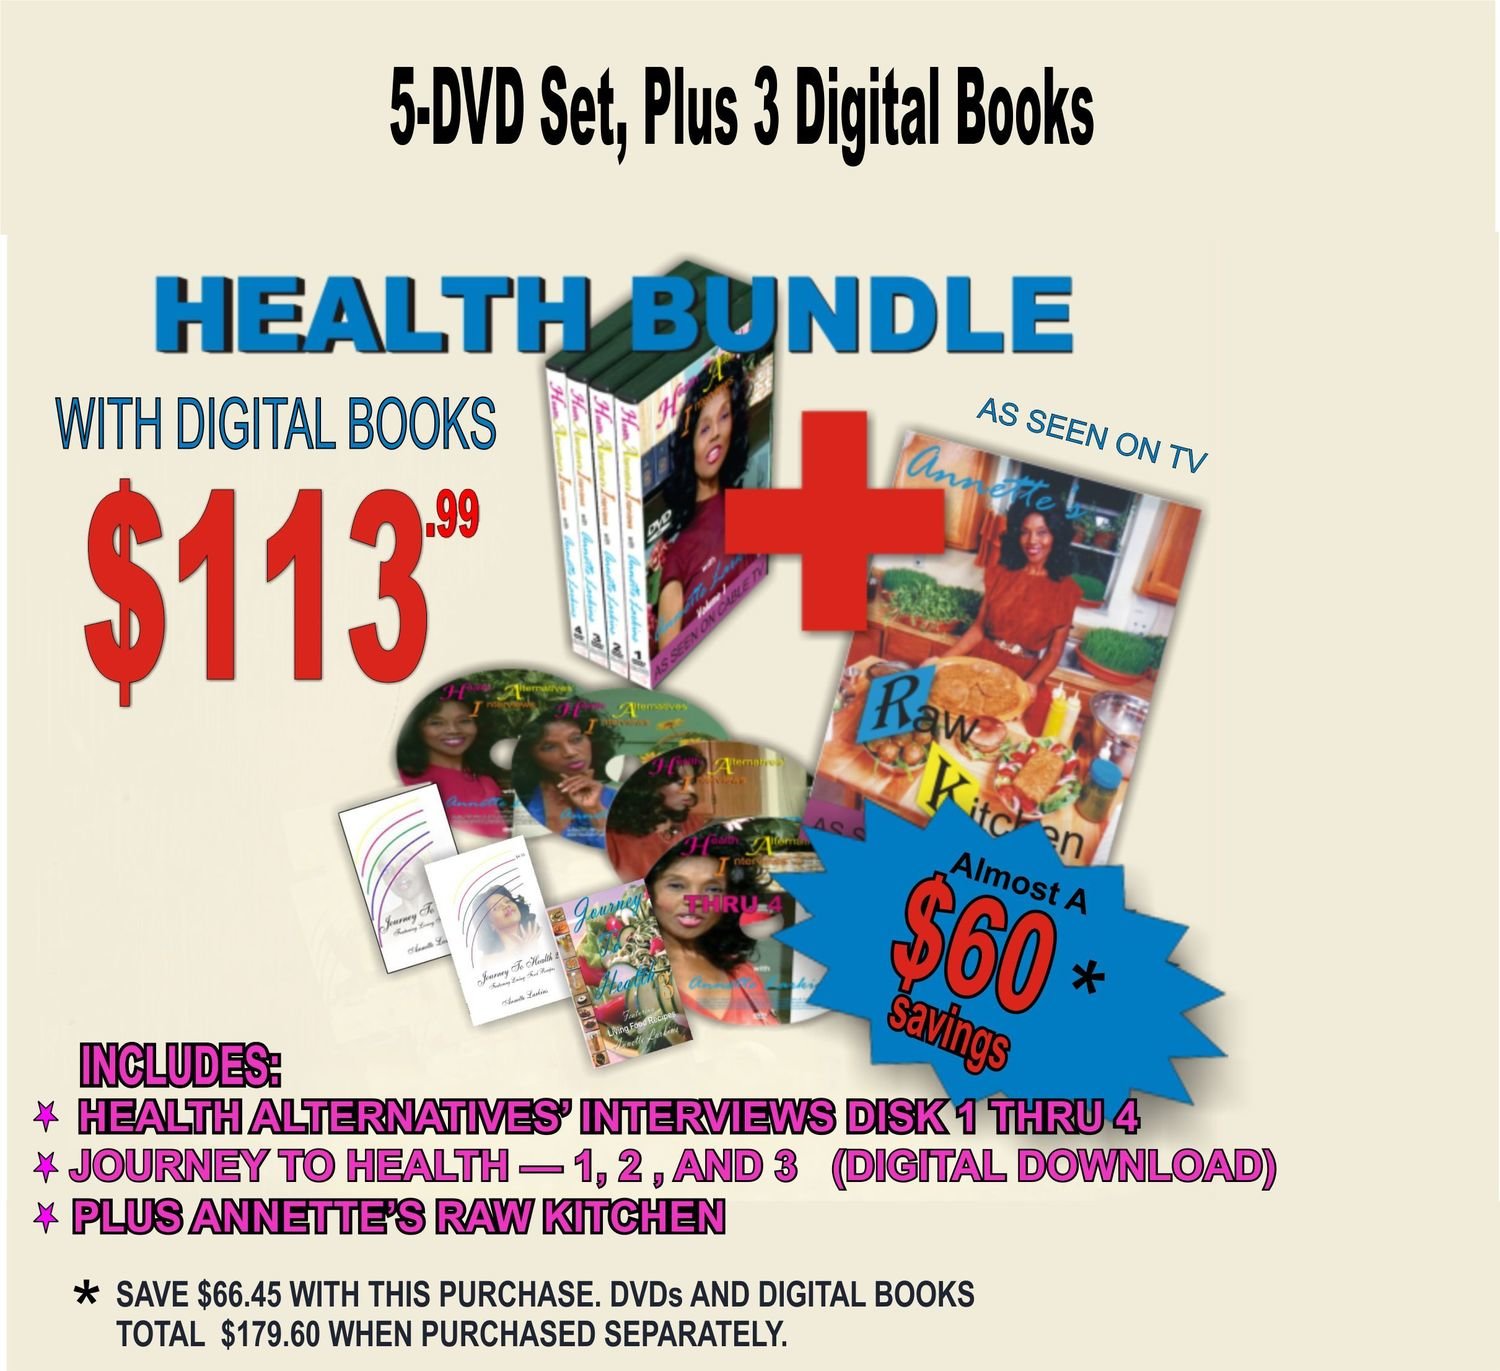 HEALTH BUNDLE PLUS/3 DIGITAL BOOKS/All digital items must be downloaded within 48 hours. (partial shipping)